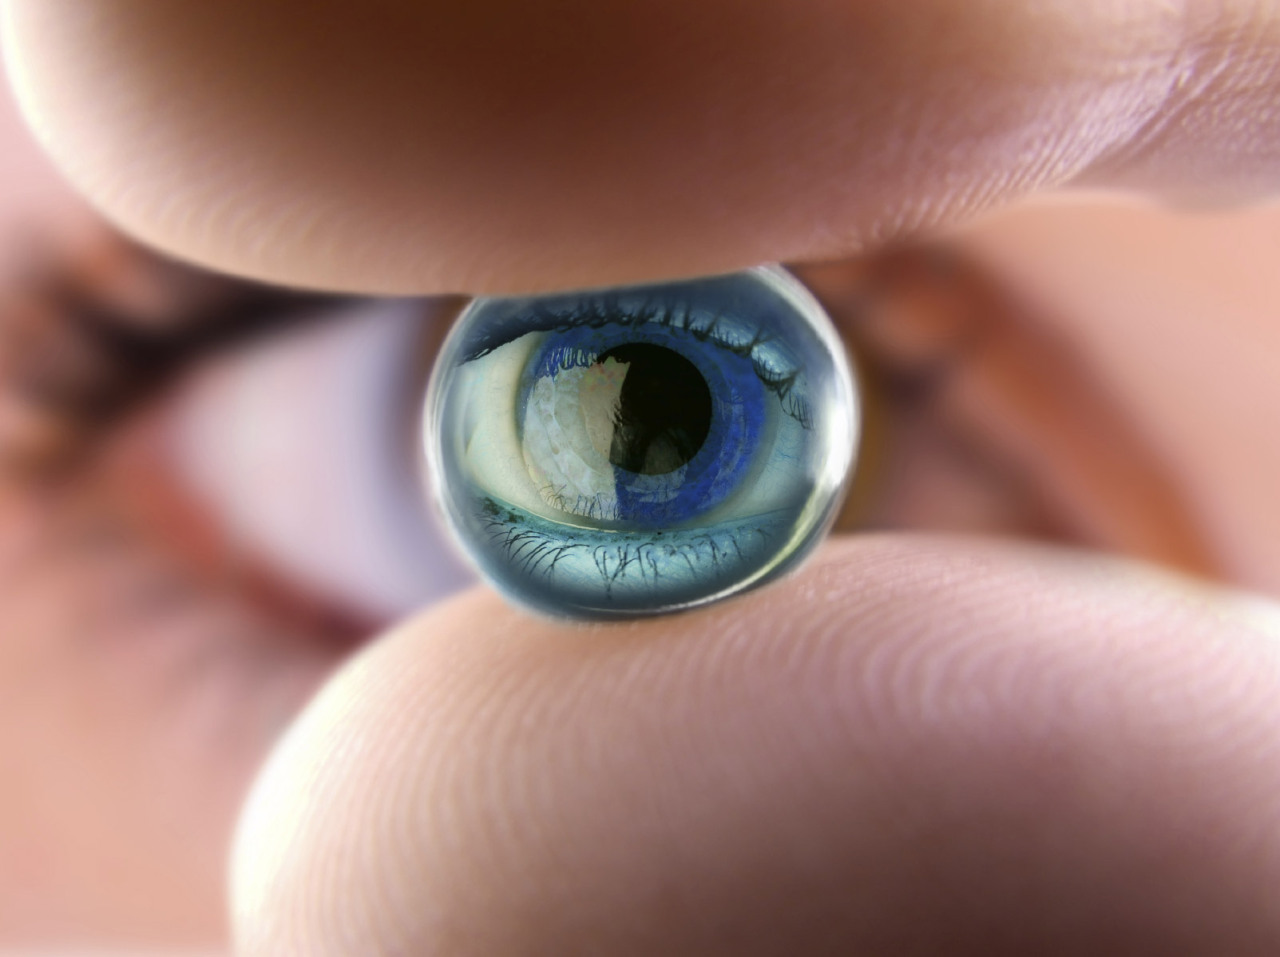 NightVision Contact Lenses ‘Now Possible’ “A new